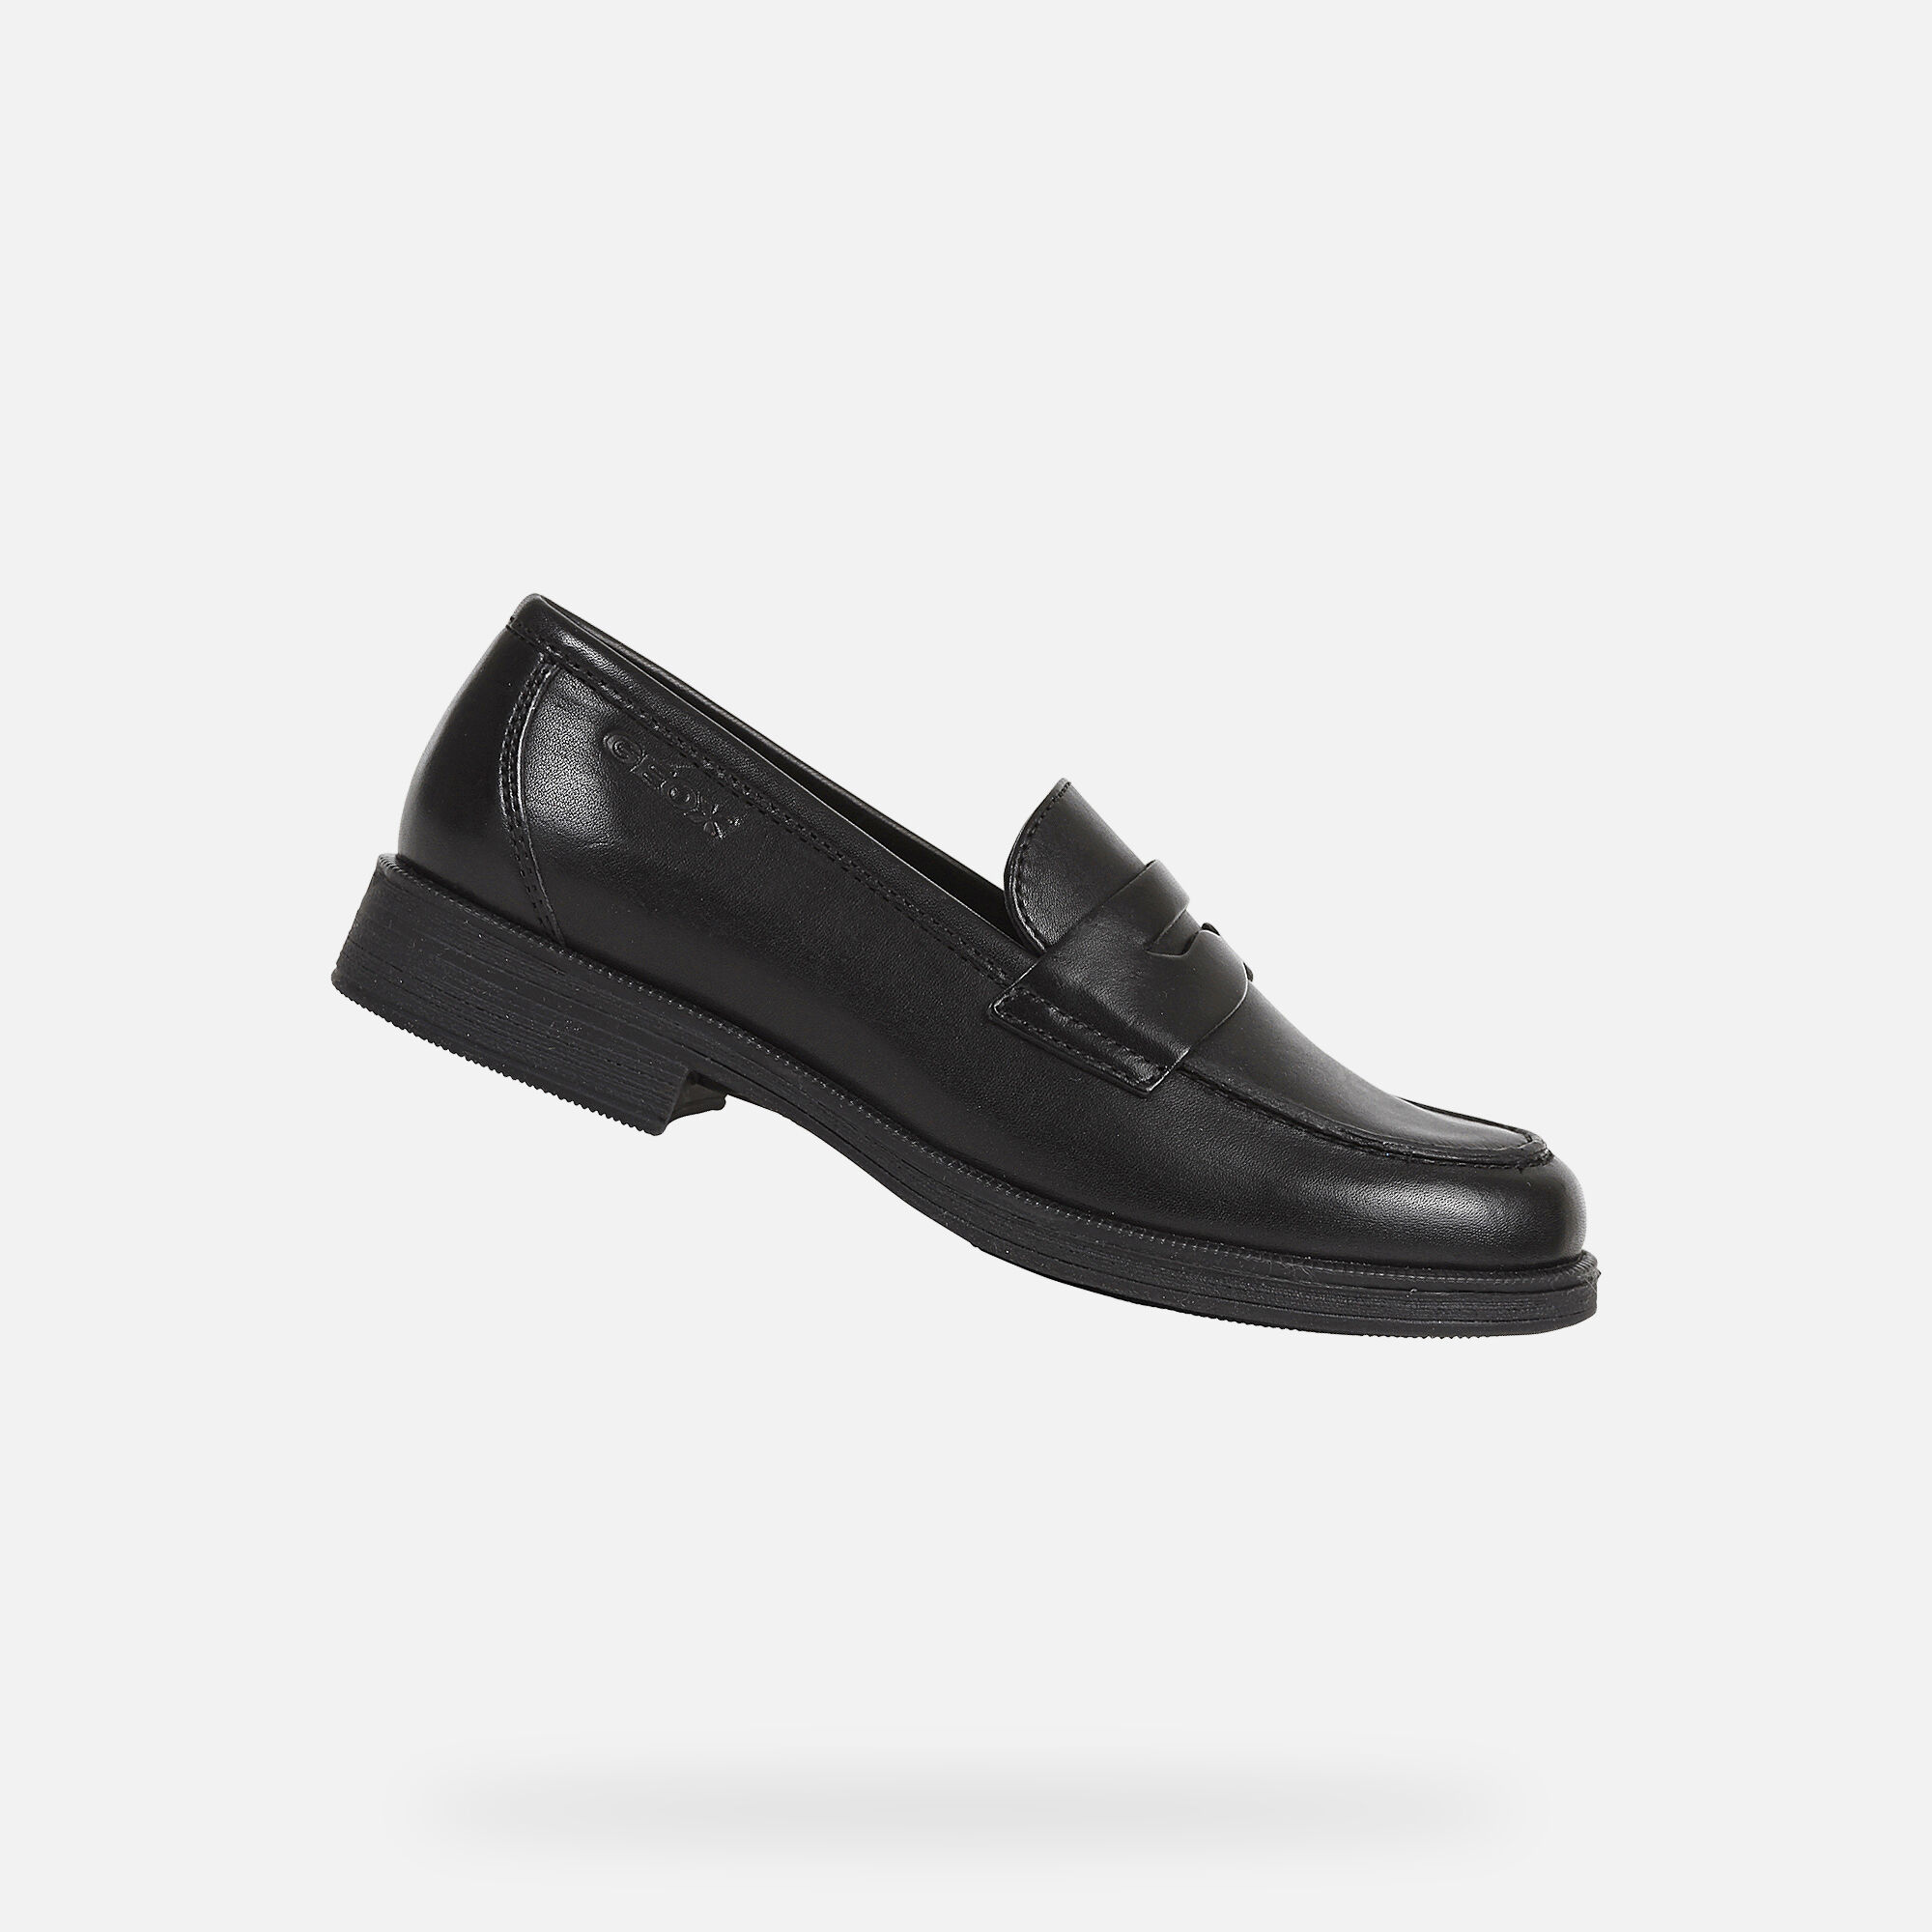 college black shoes for girl